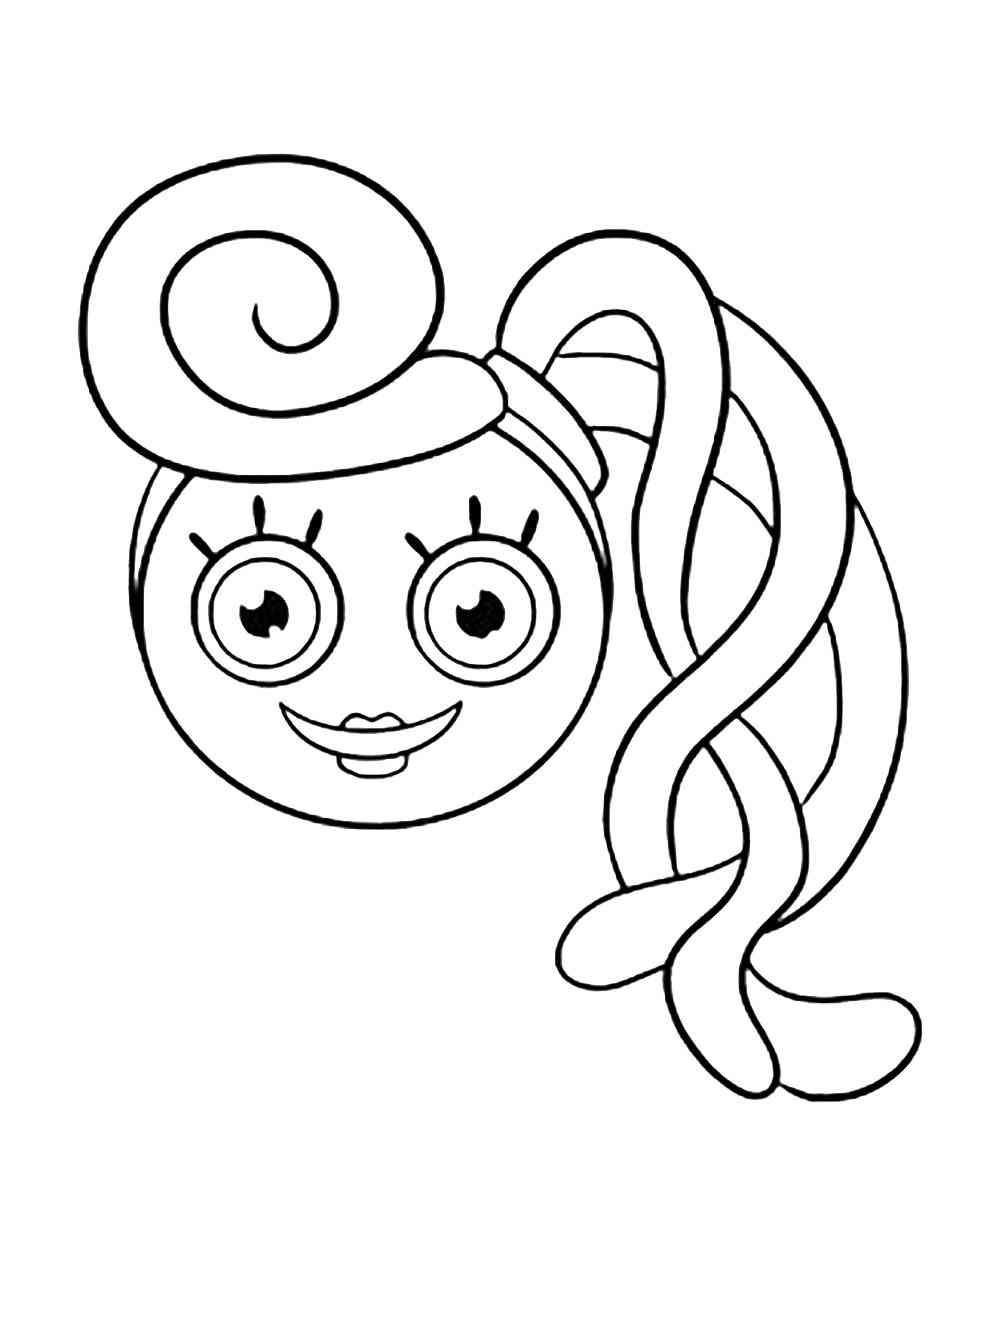 Mommy Long Legs Coloring Pages Fire Warning - Get Coloring Pages